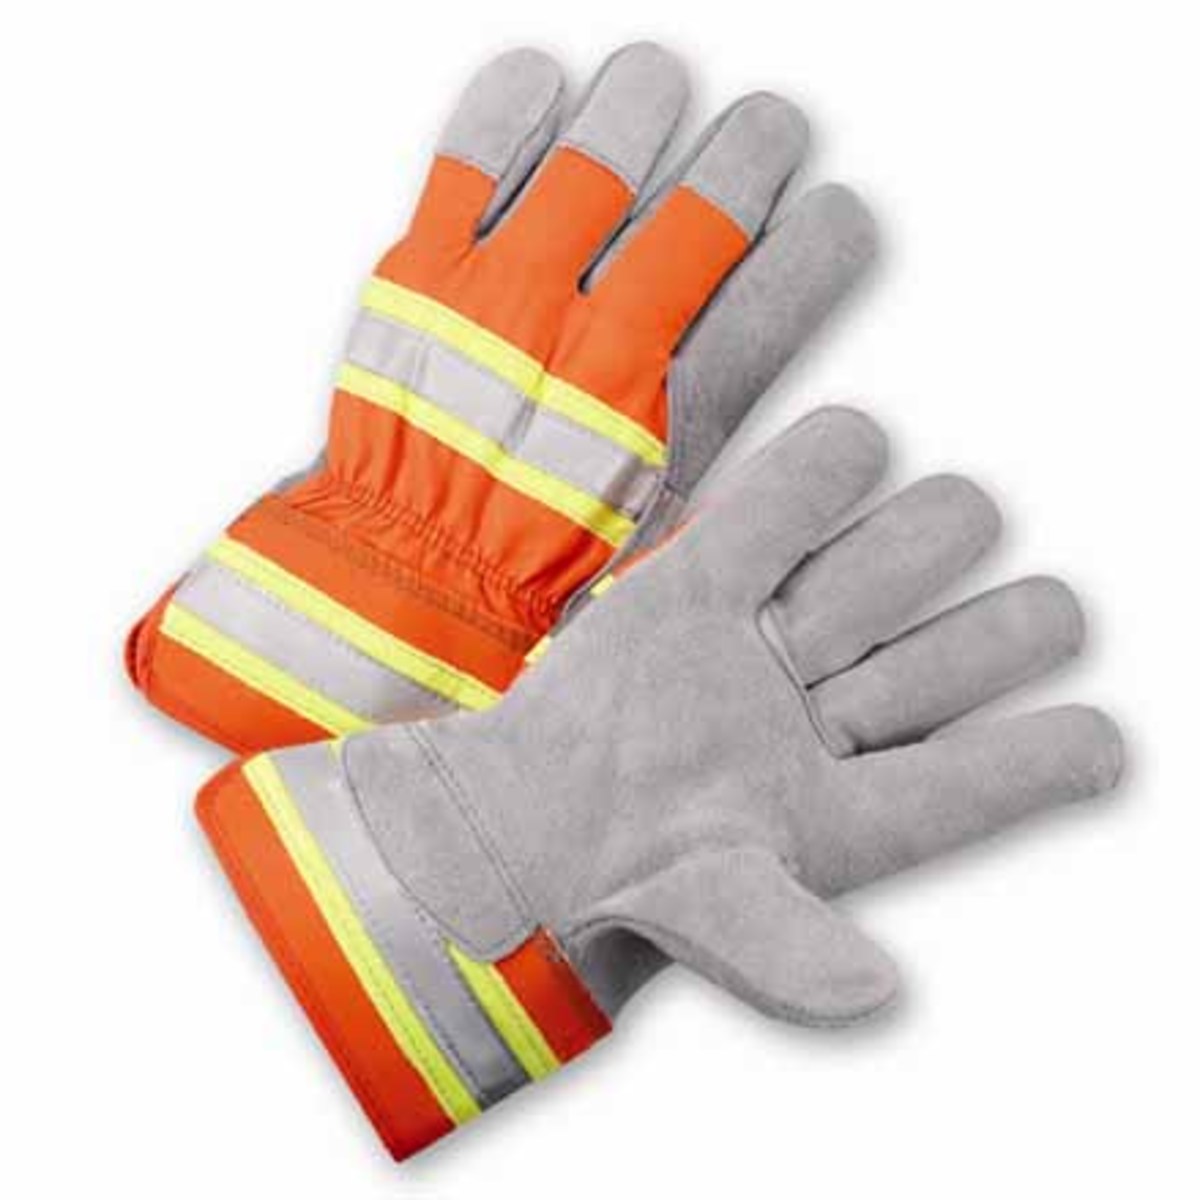 PIP® Medium Premium Split Leather Palm Gloves With Polyester Back And Rubberized Safety Cuff